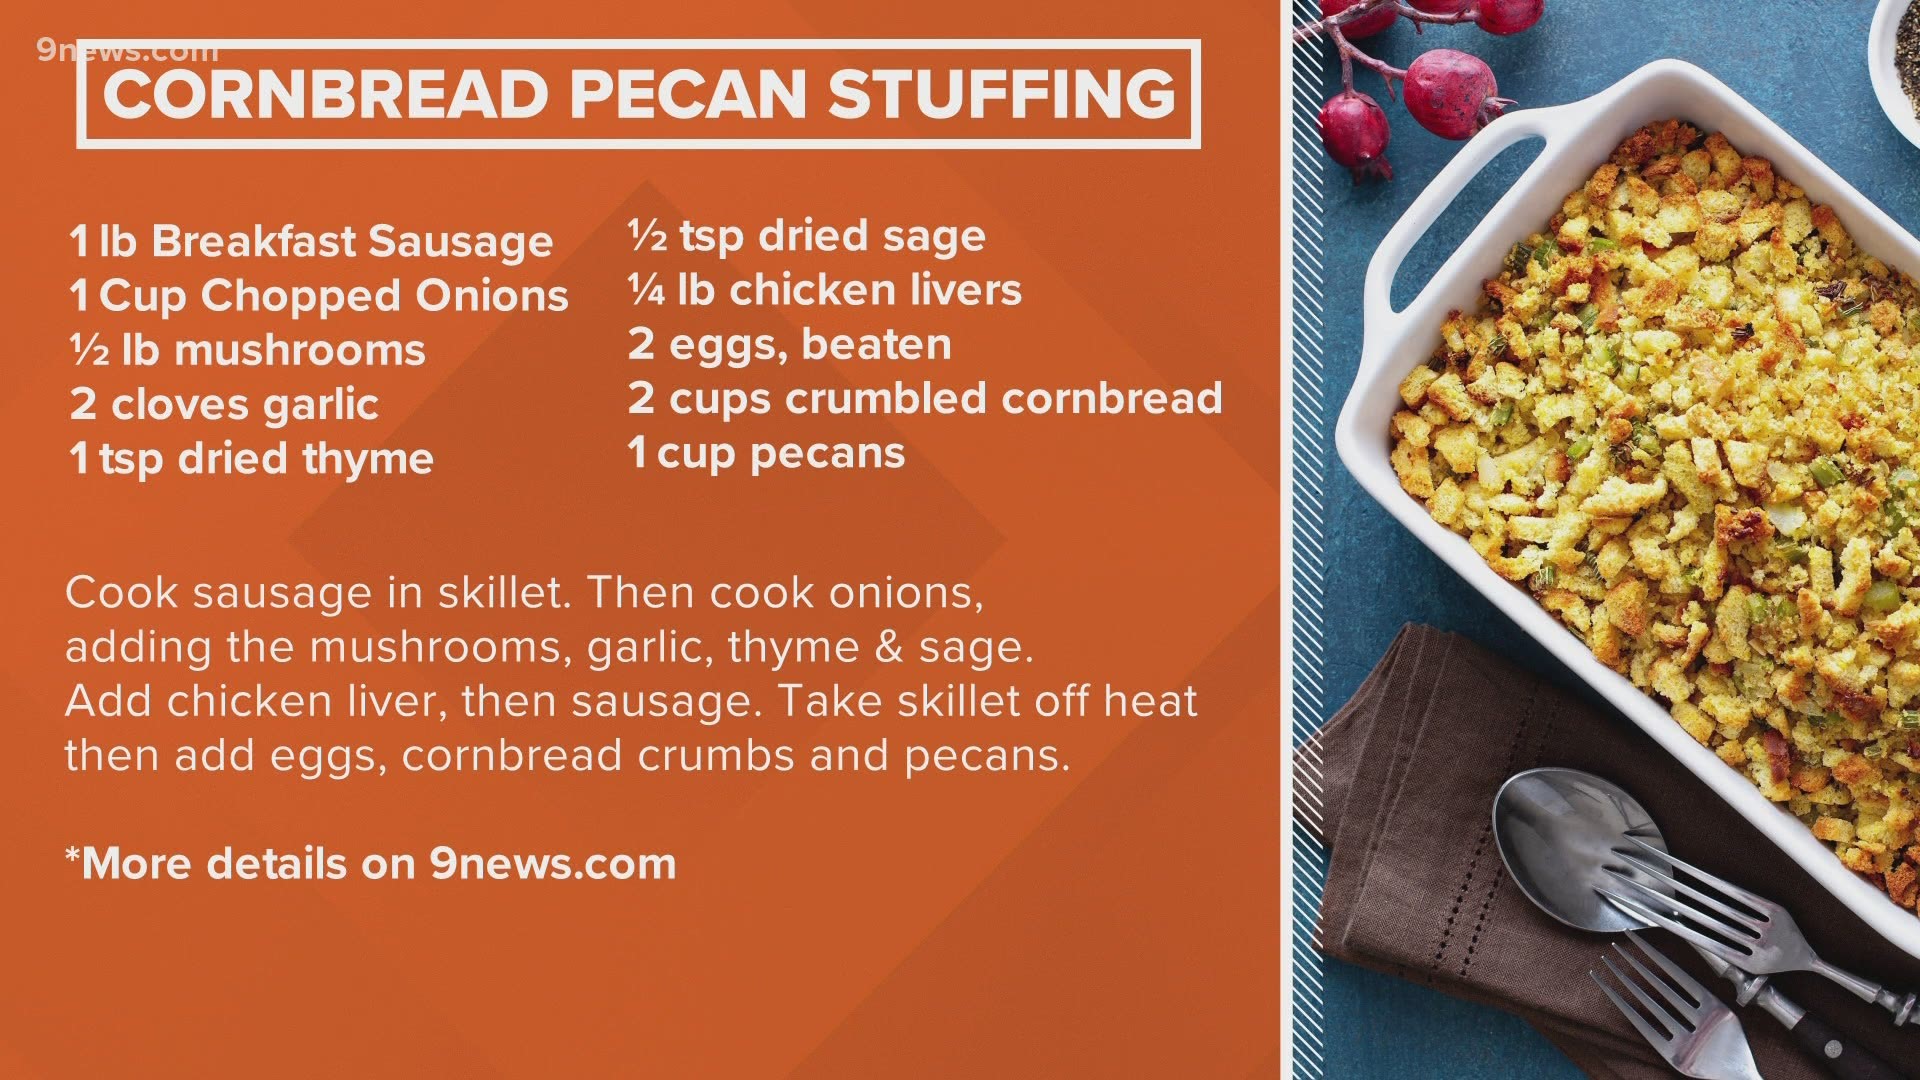 Here's one for the Thanksgiving table from 9News viewer Jeri Paull, who shares her favorite dressing recipe.